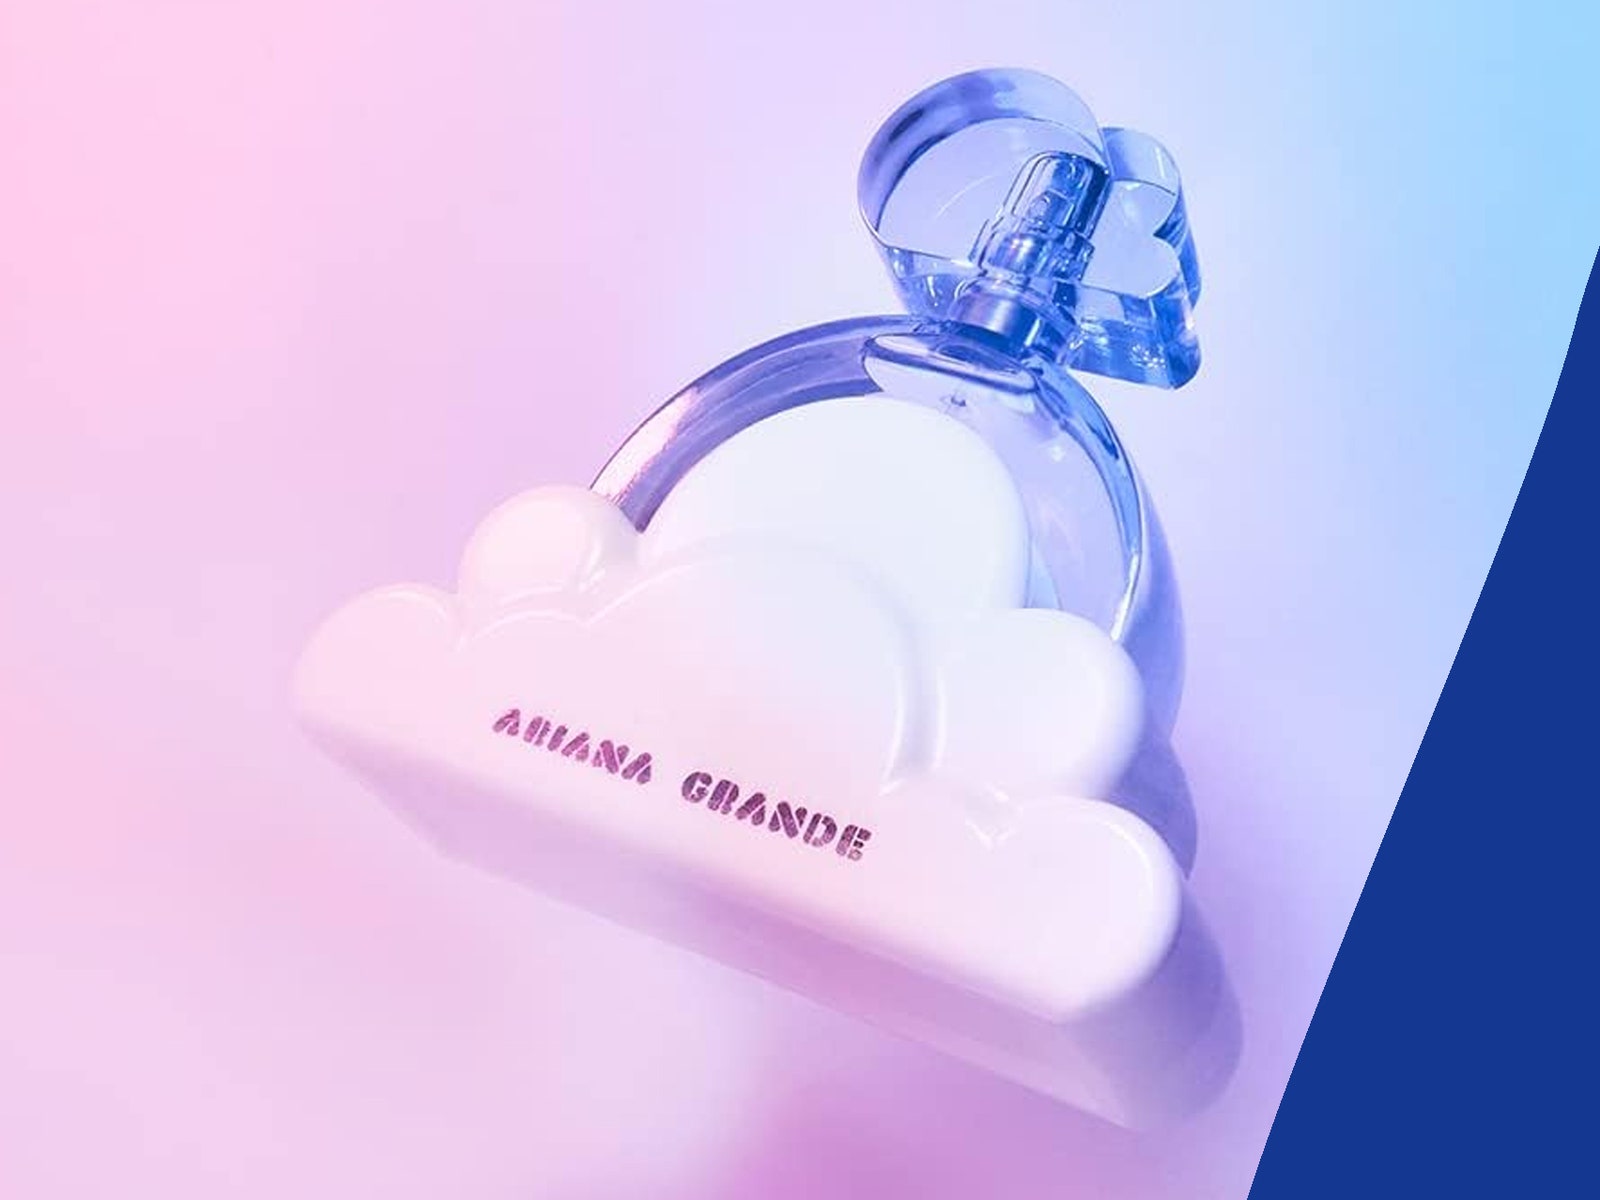 These early Prime Day fragrance deals are too good to miss (discounted Ariana Grande Cloud, was that?)